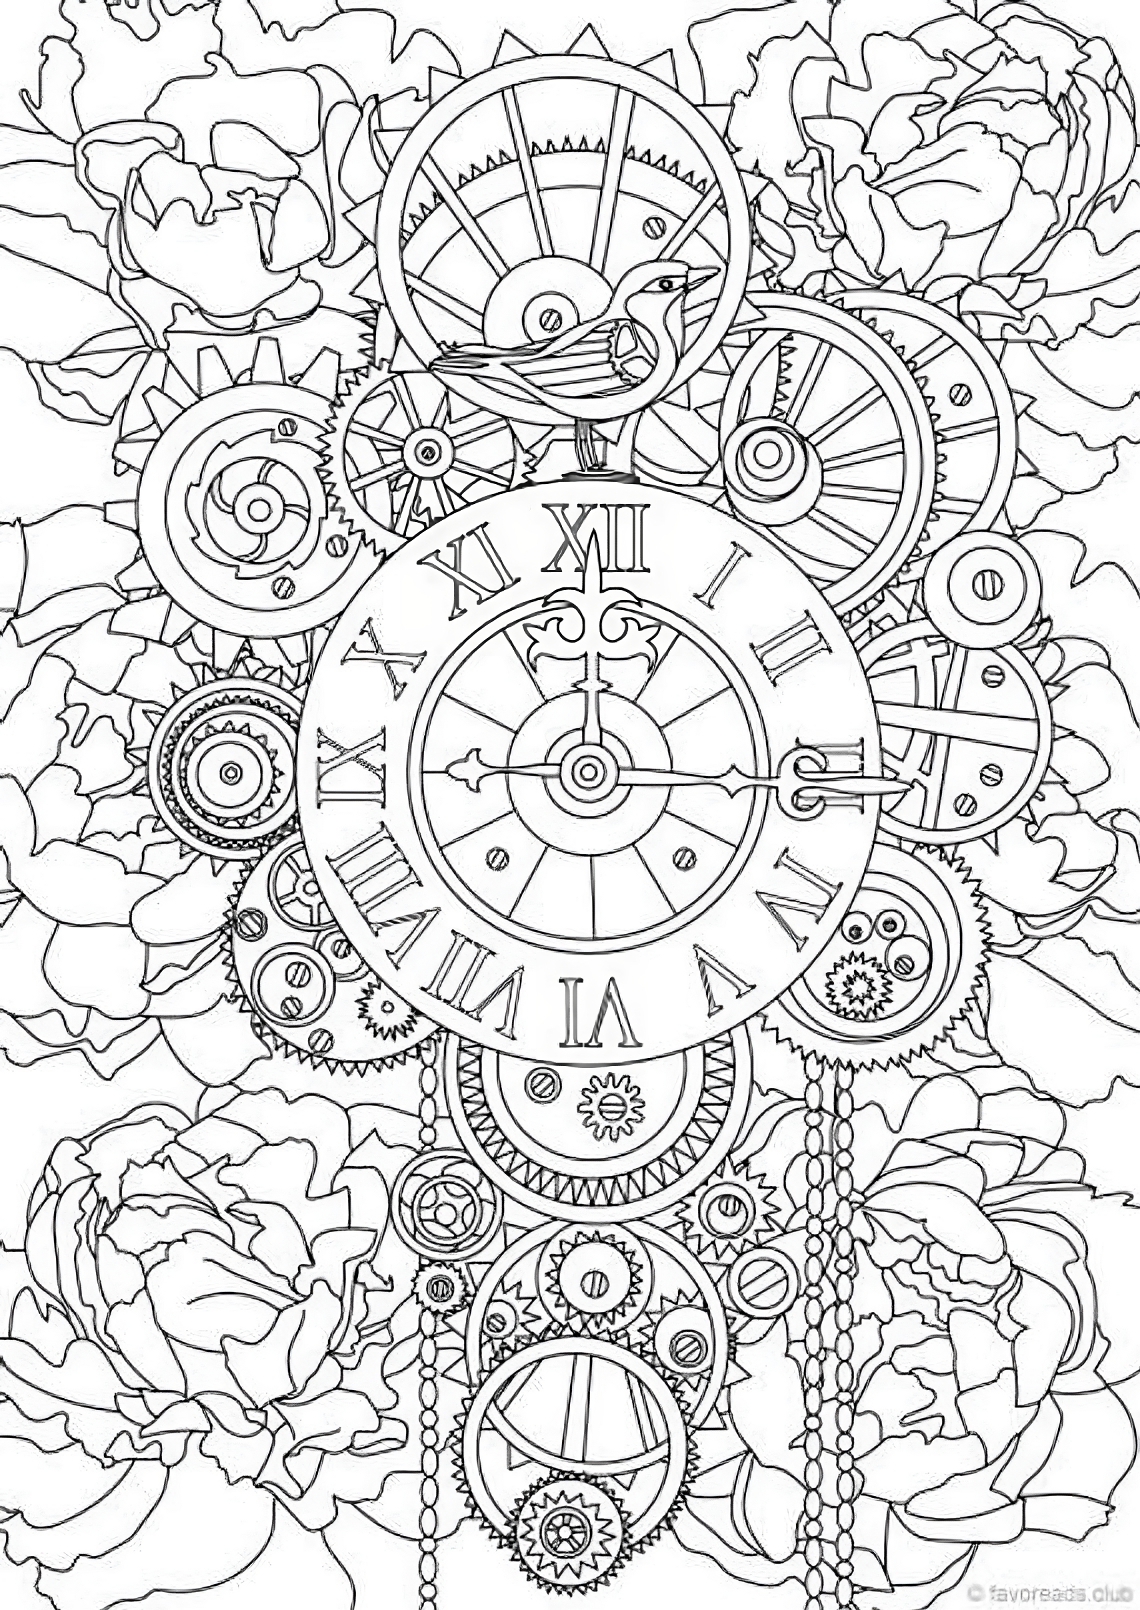 Steampunk Clock - Printable Adult Coloring Page from Favoreads (Coloring  book pages for adults and kids, Coloring sheets, Coloring designs)